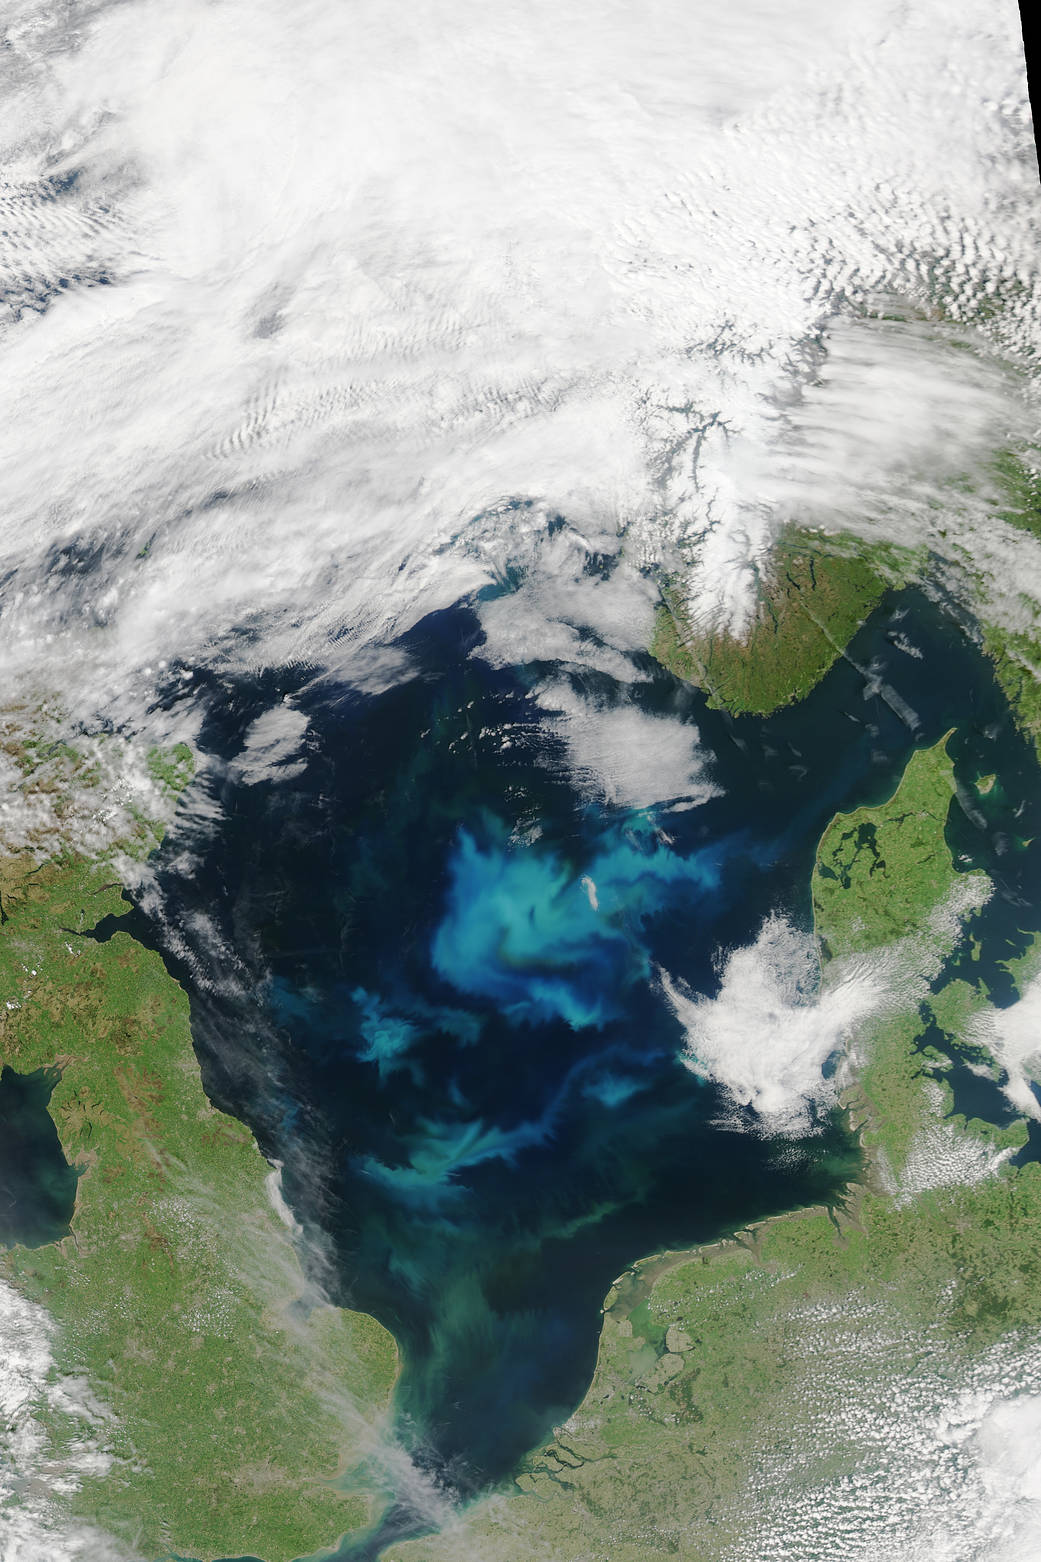 Bloom of greenish blue phytoplankton in dark blue waters with clouds overhead